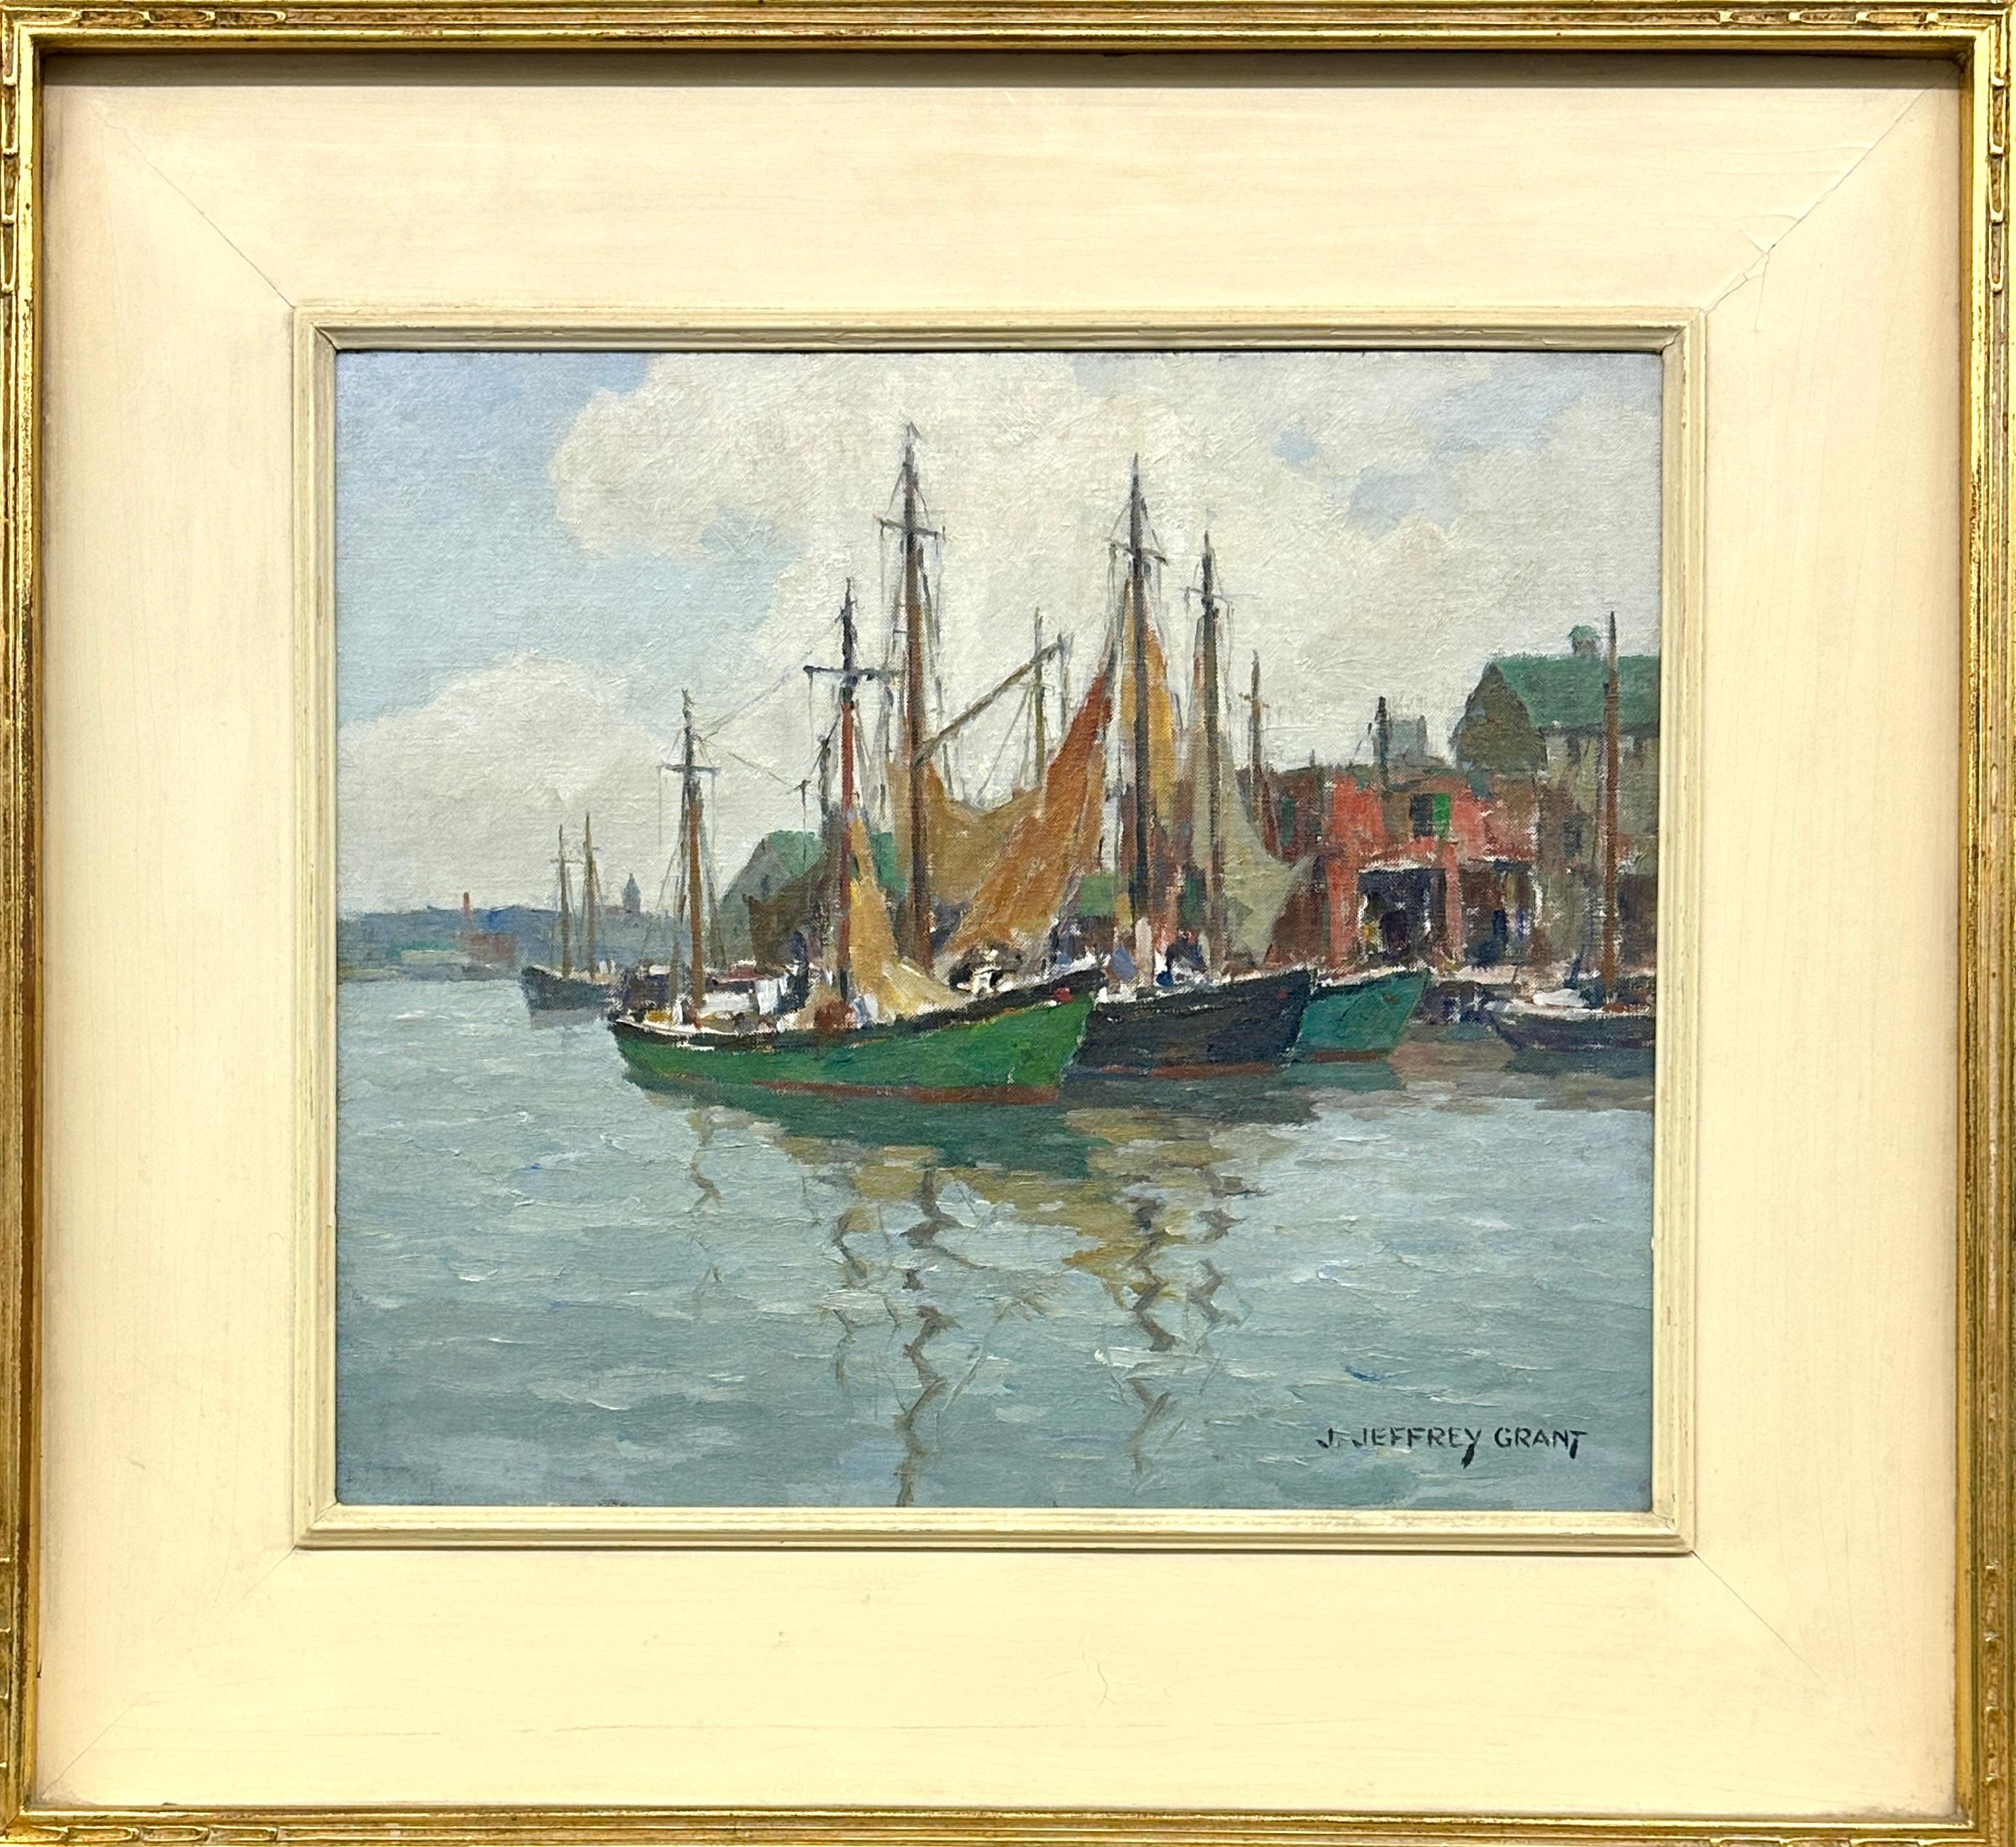 Drying the Sails, dock scene Gloucester Harbor with fishing boats; mid-century - Painting by James Jeffrey Grant